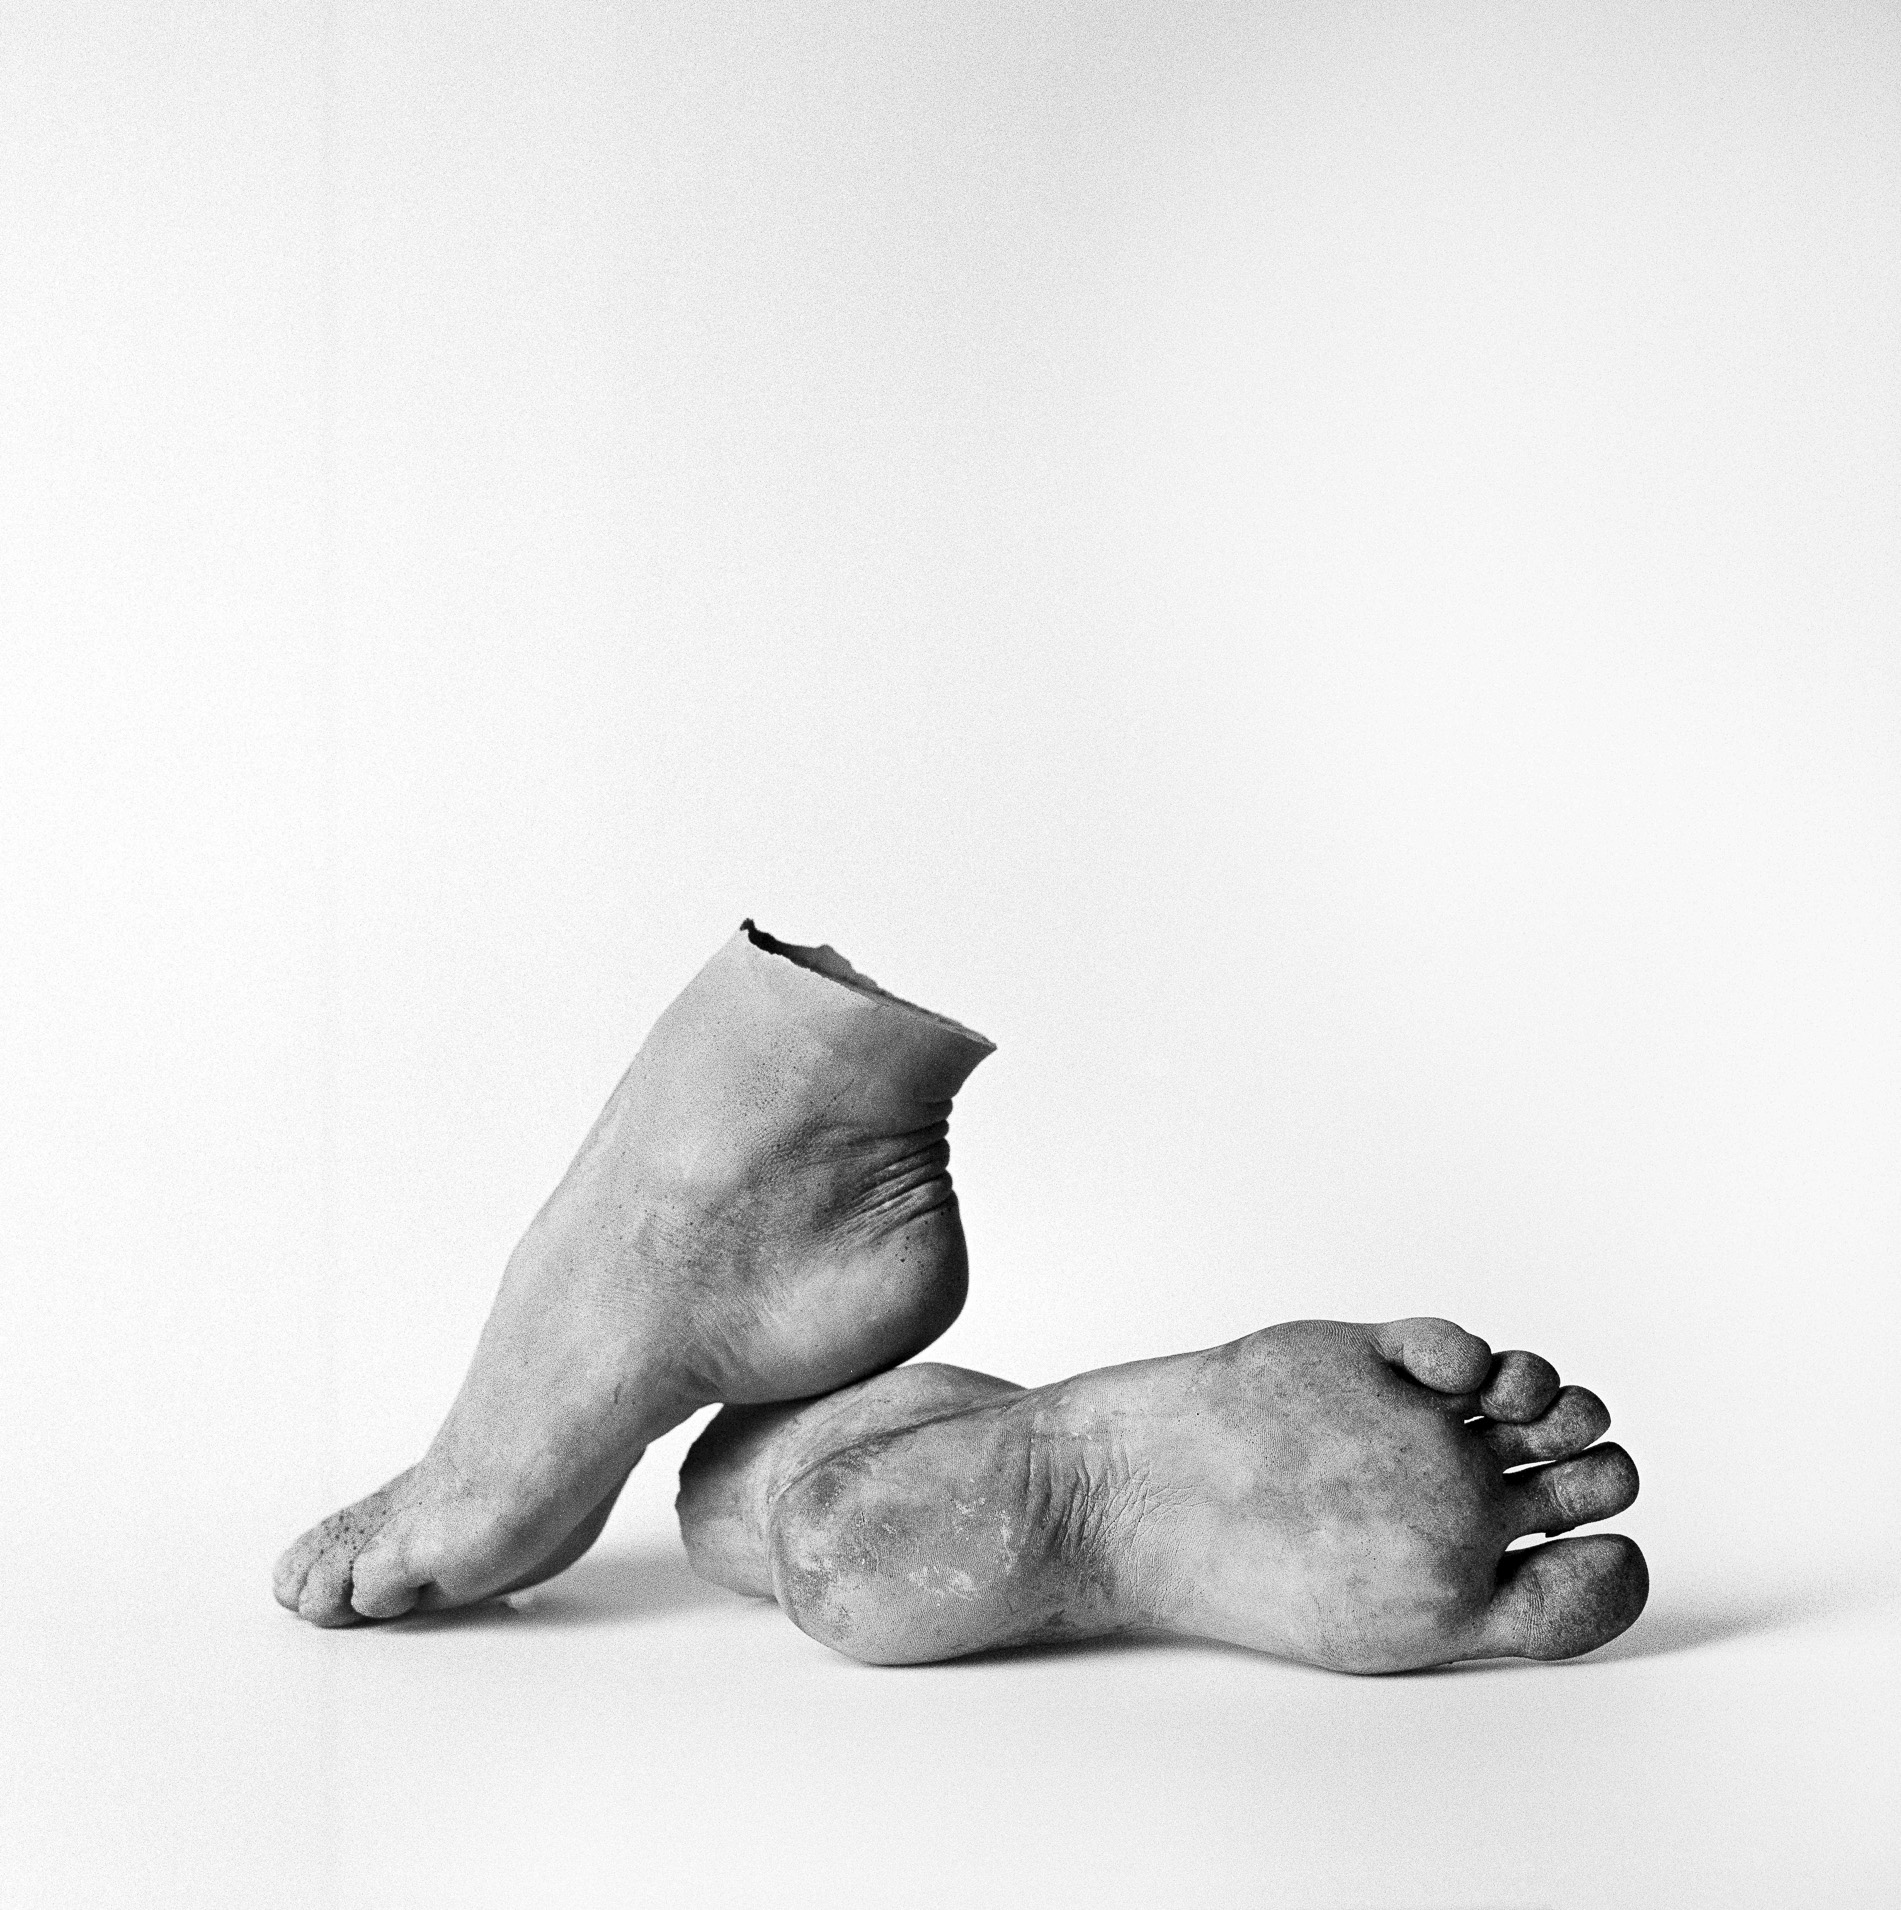 A sculpture of two feet